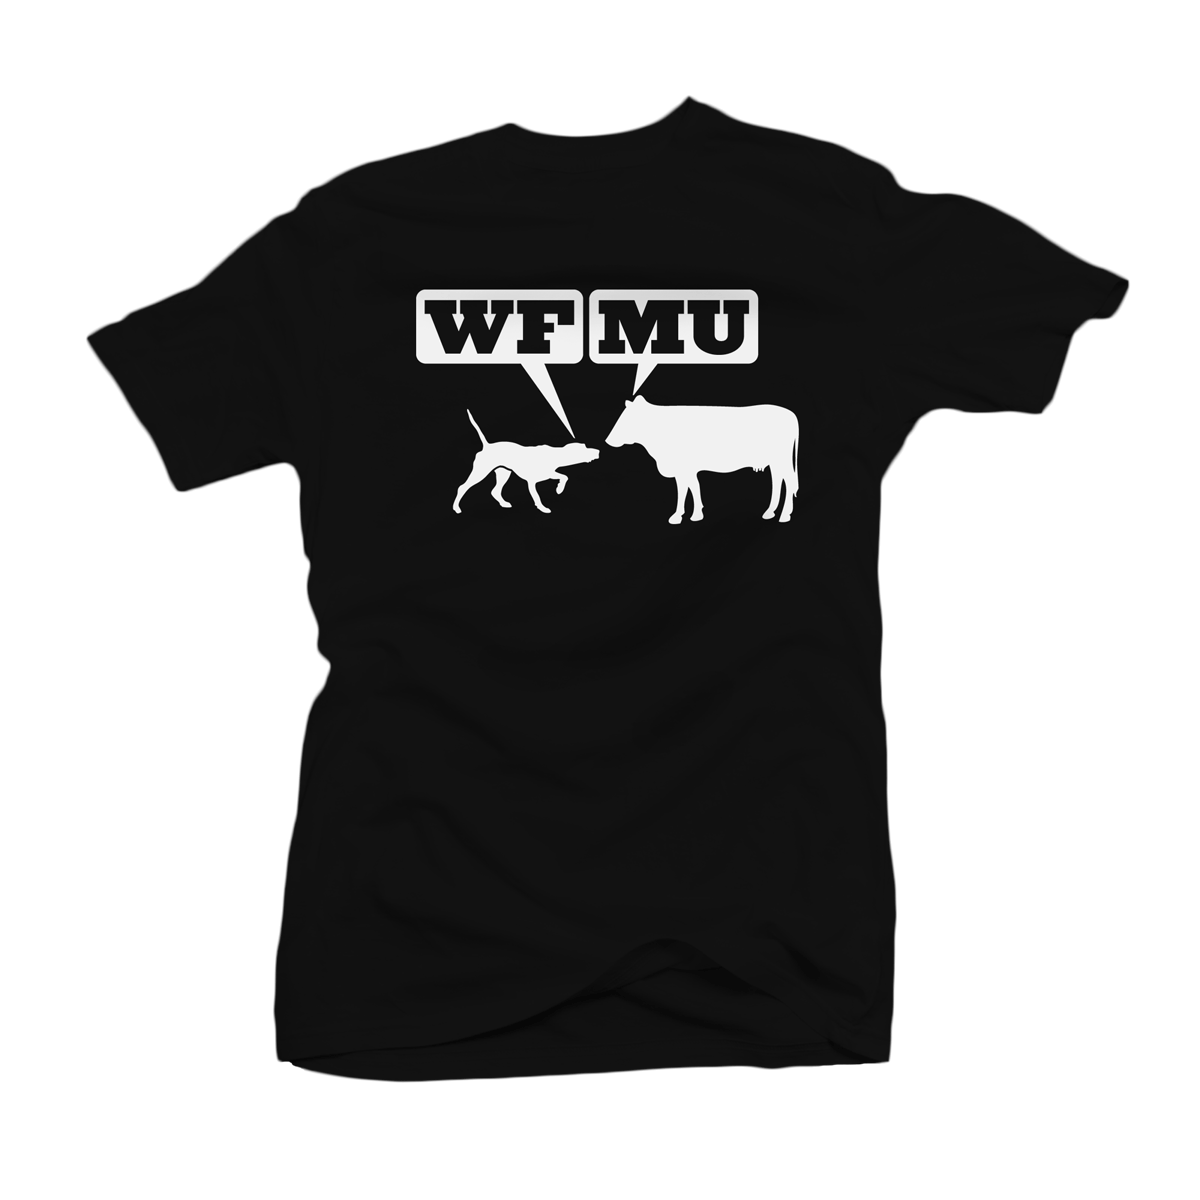 A Classic Back in All Sizes! White Woof-Moo Logo on Black T-Shirt